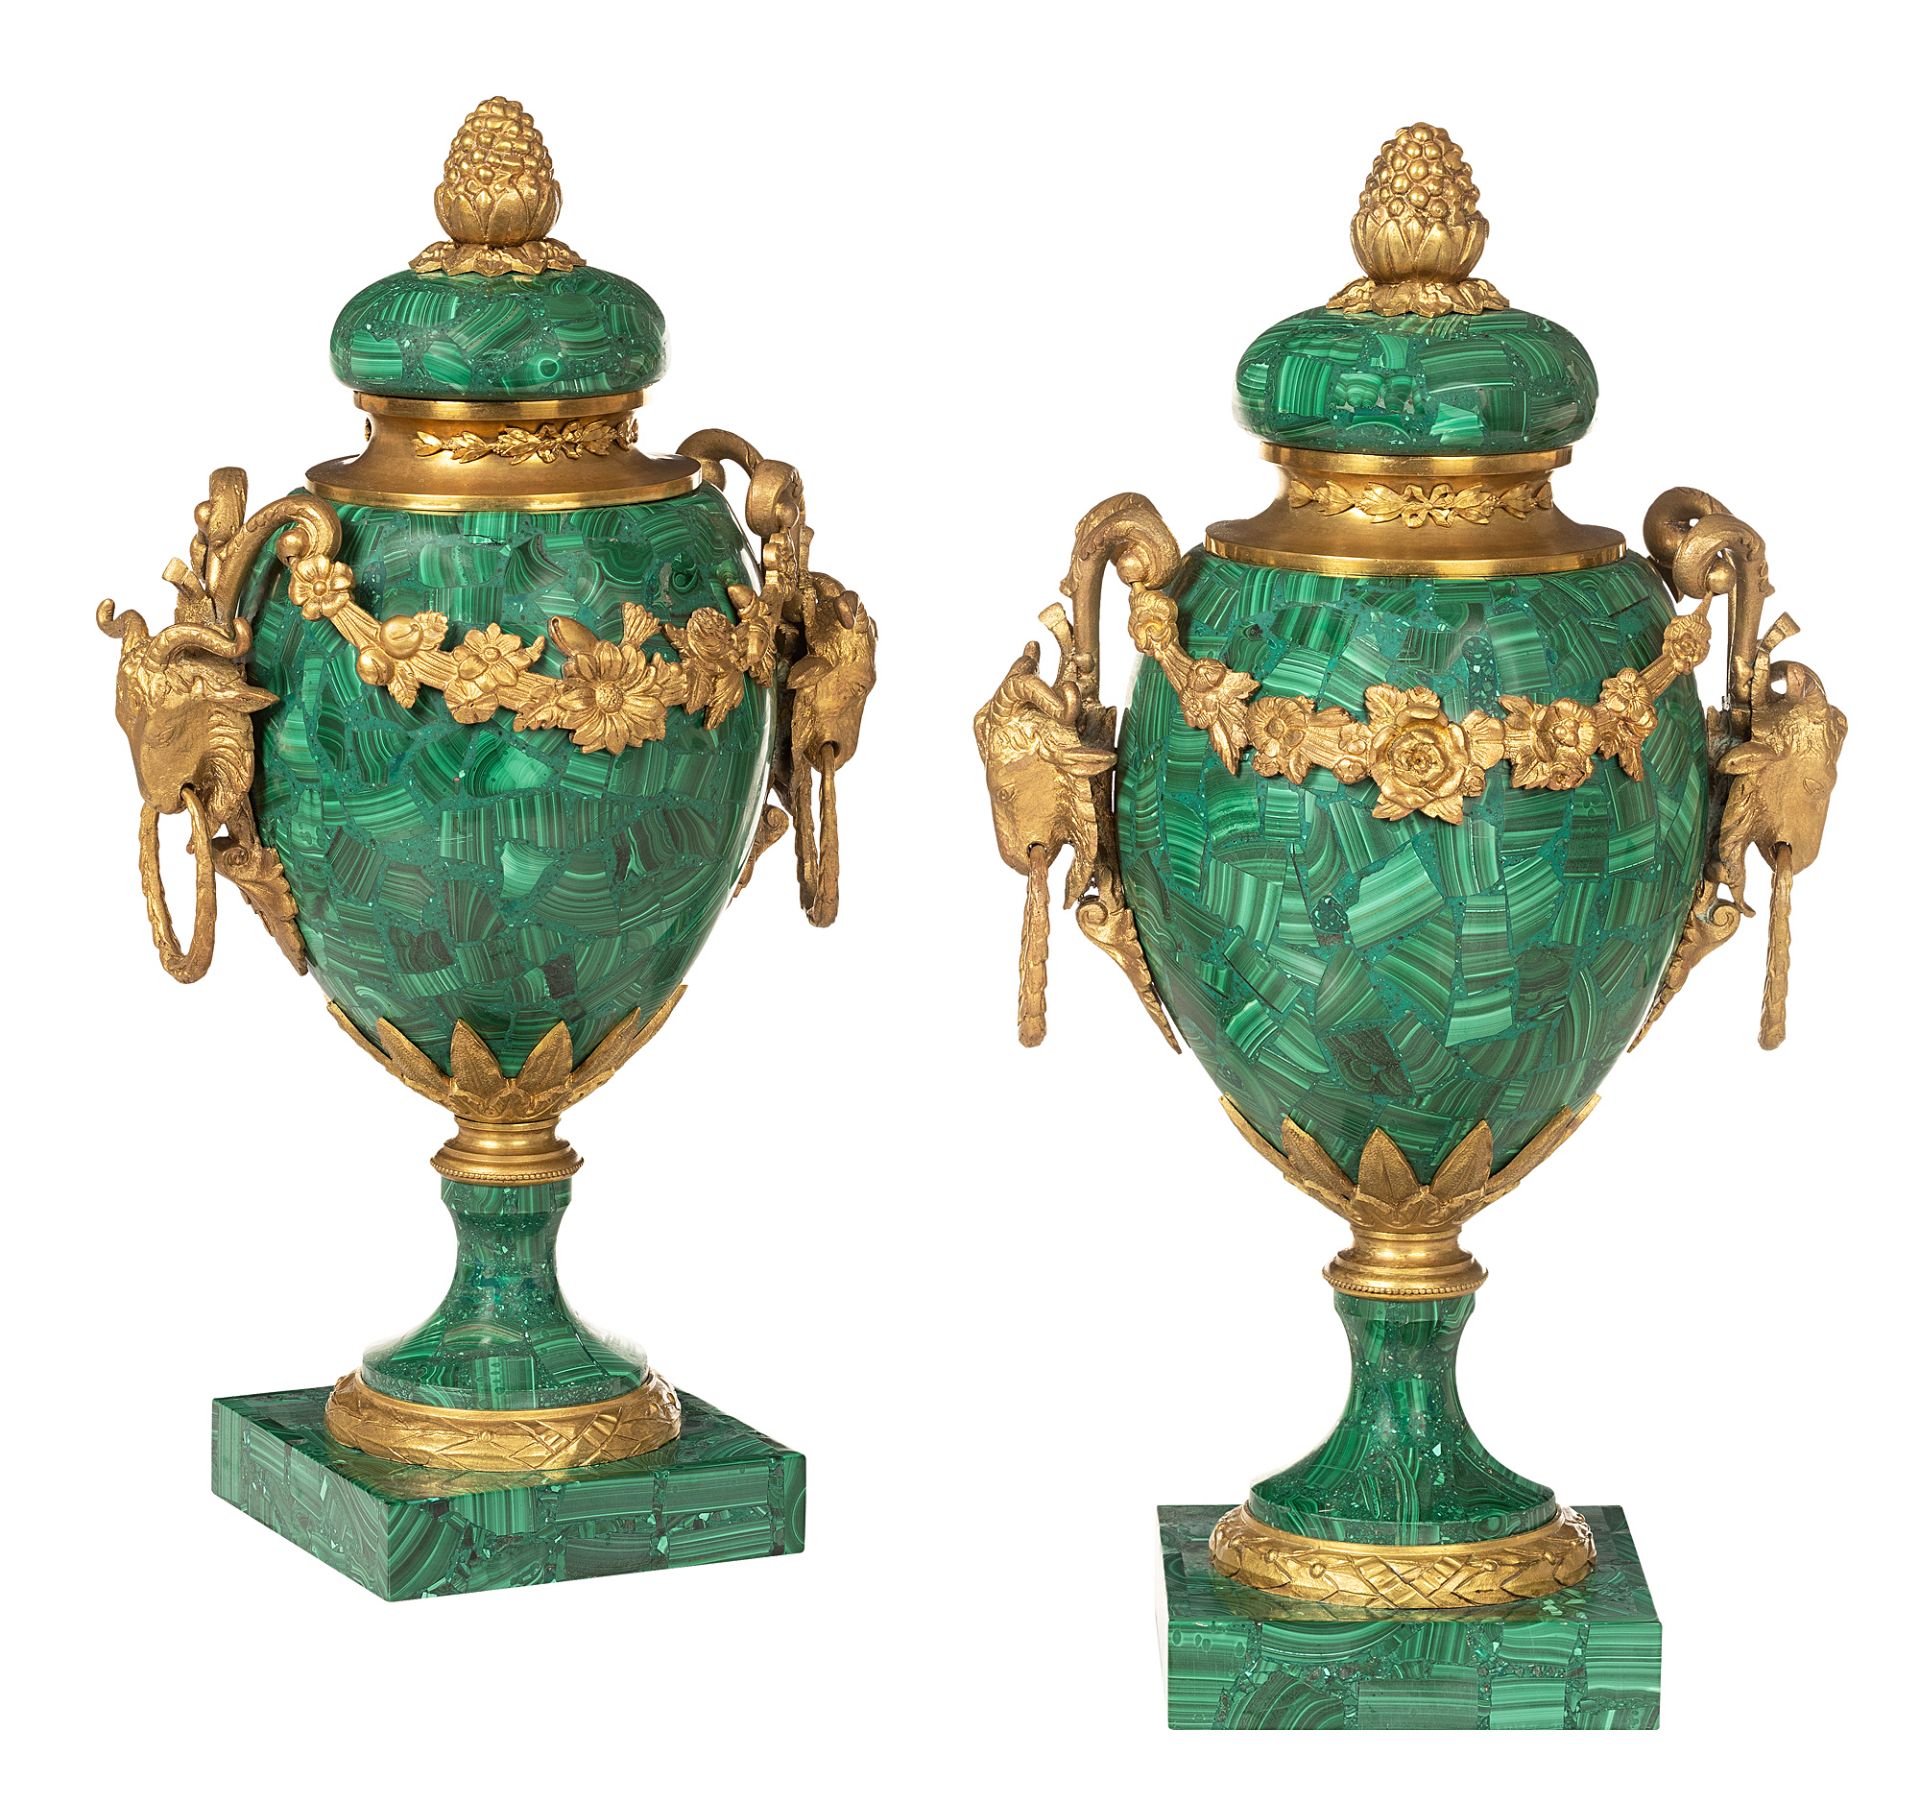 Pair of malachite vases in the style of French Early Classicism - Image 3 of 8